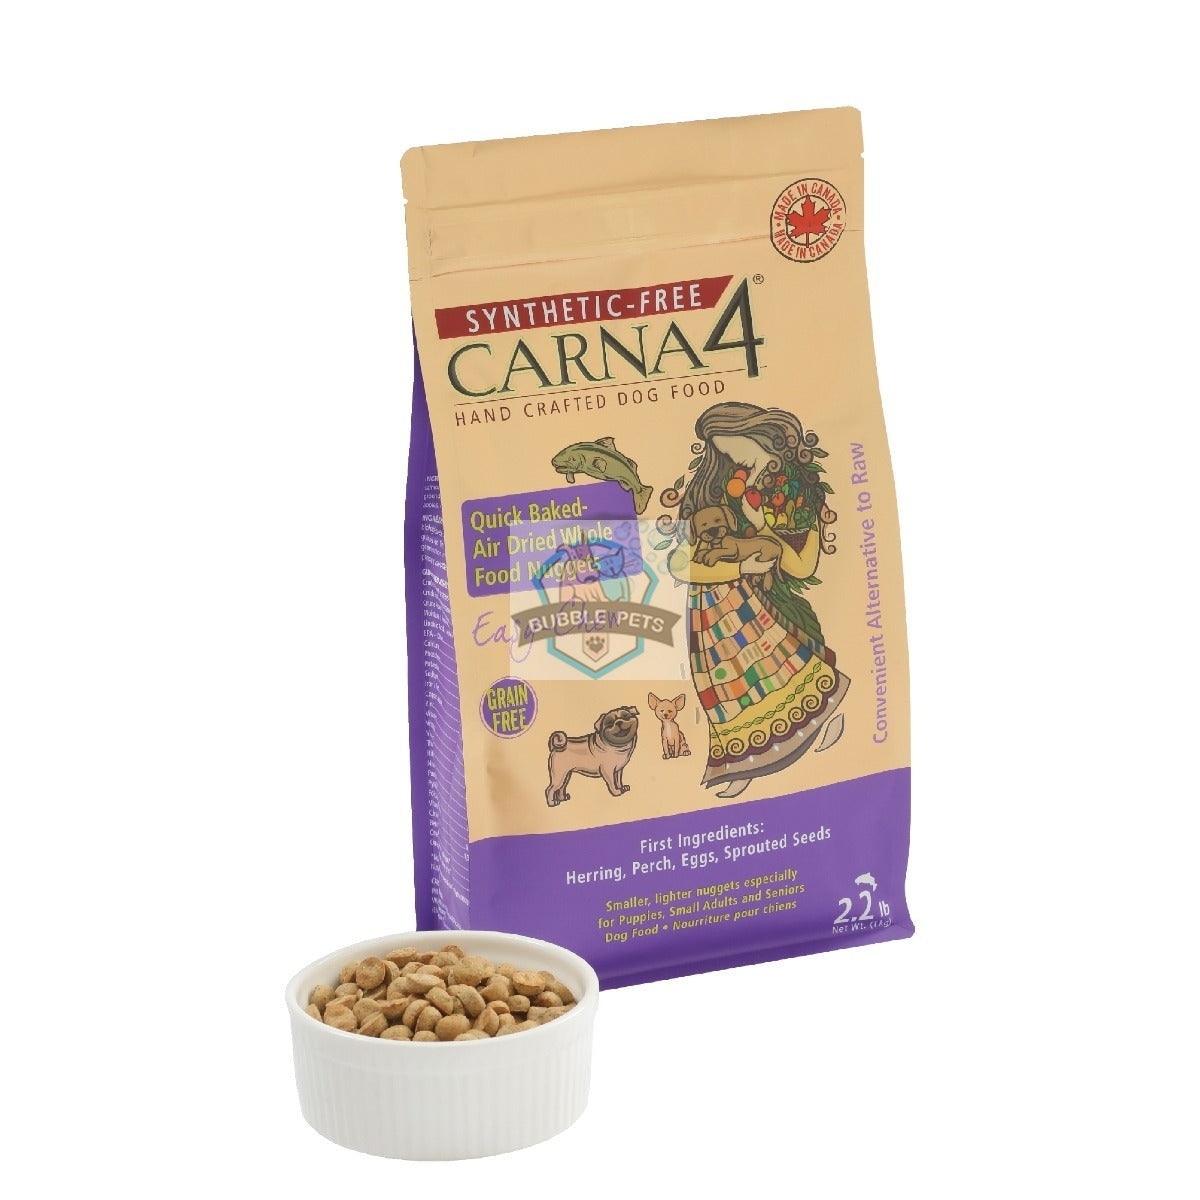 Carna4 Baked & Dried Easy-Chew Fish Dry Dog Food